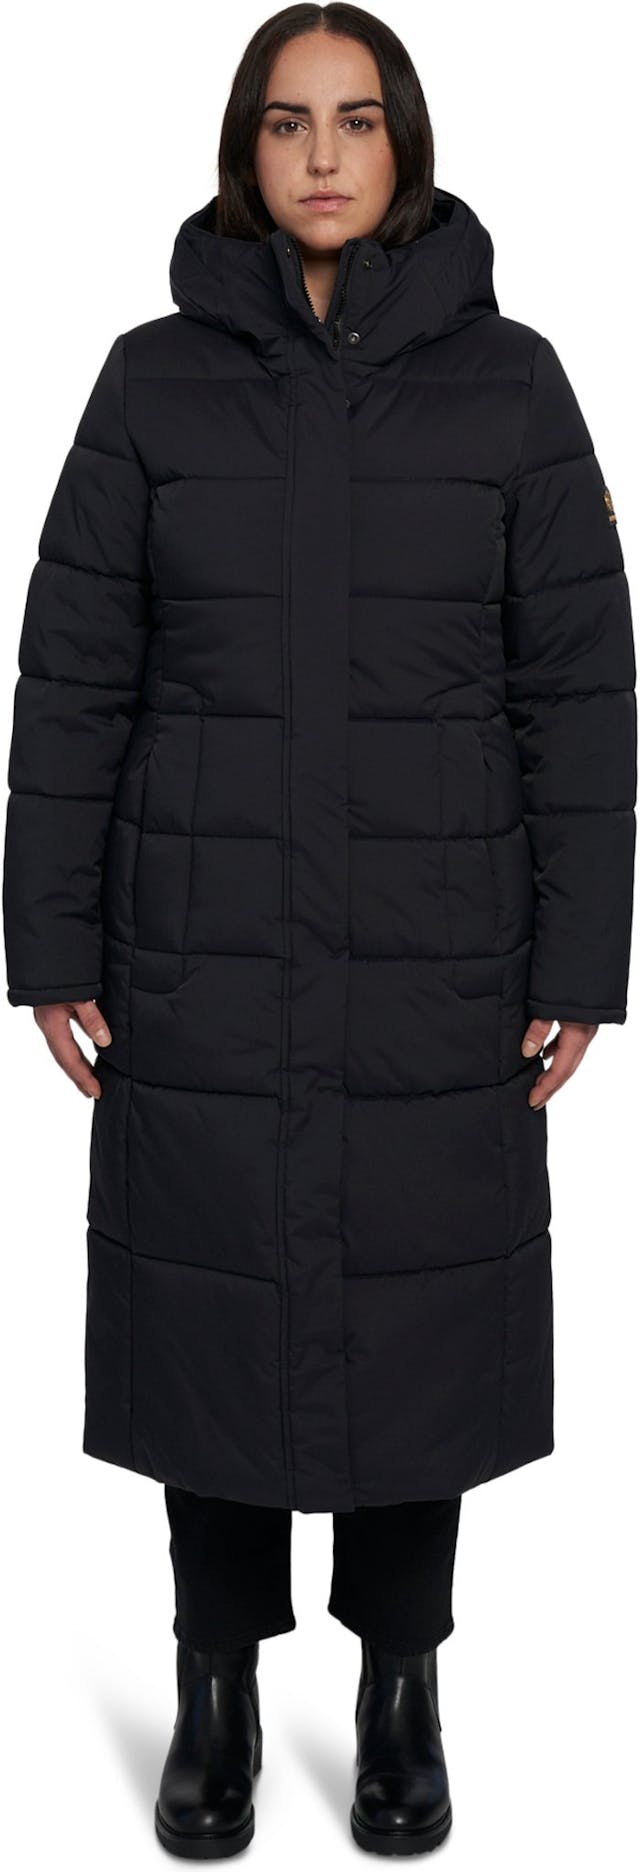 Product image for Blizzard Jacket - Women's